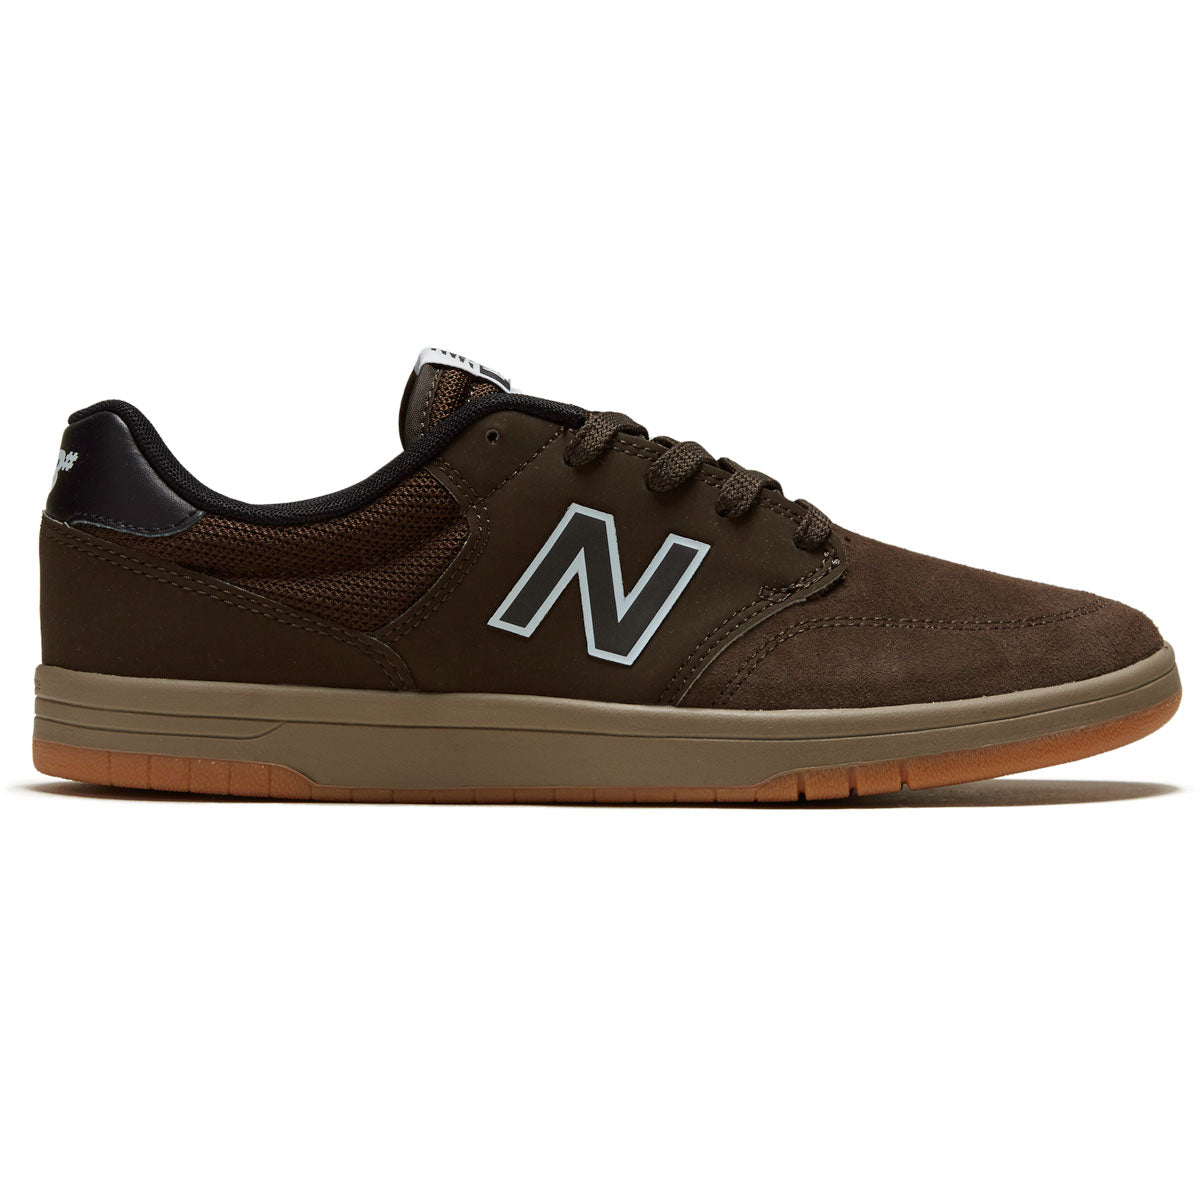 New Balance 425 Shoes - Brown image 1